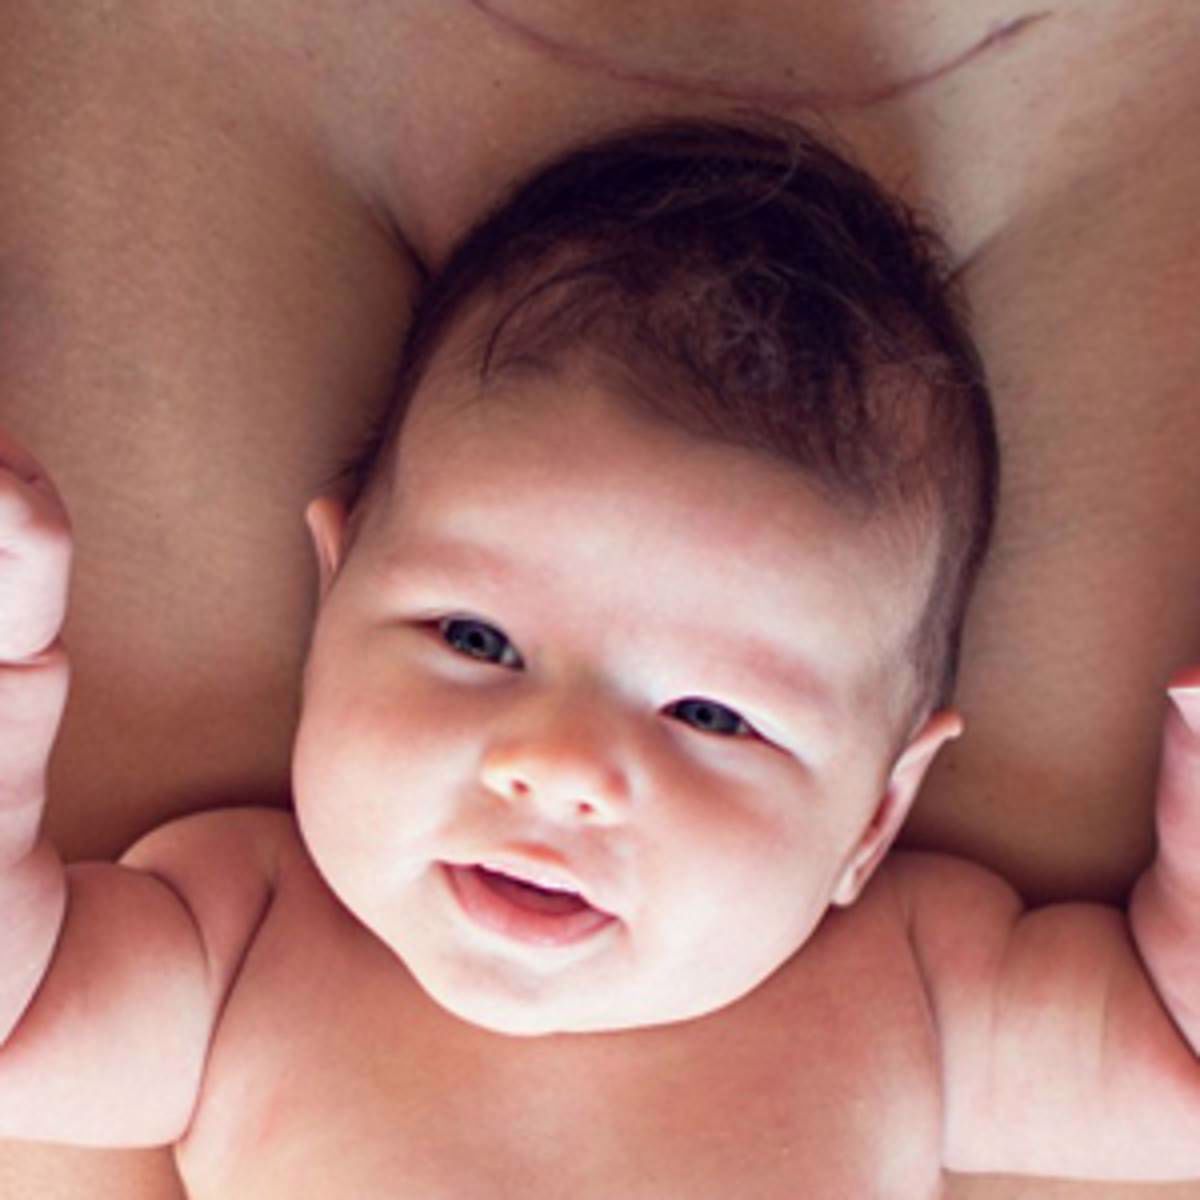 5 Things You Need to Know About C-Sections